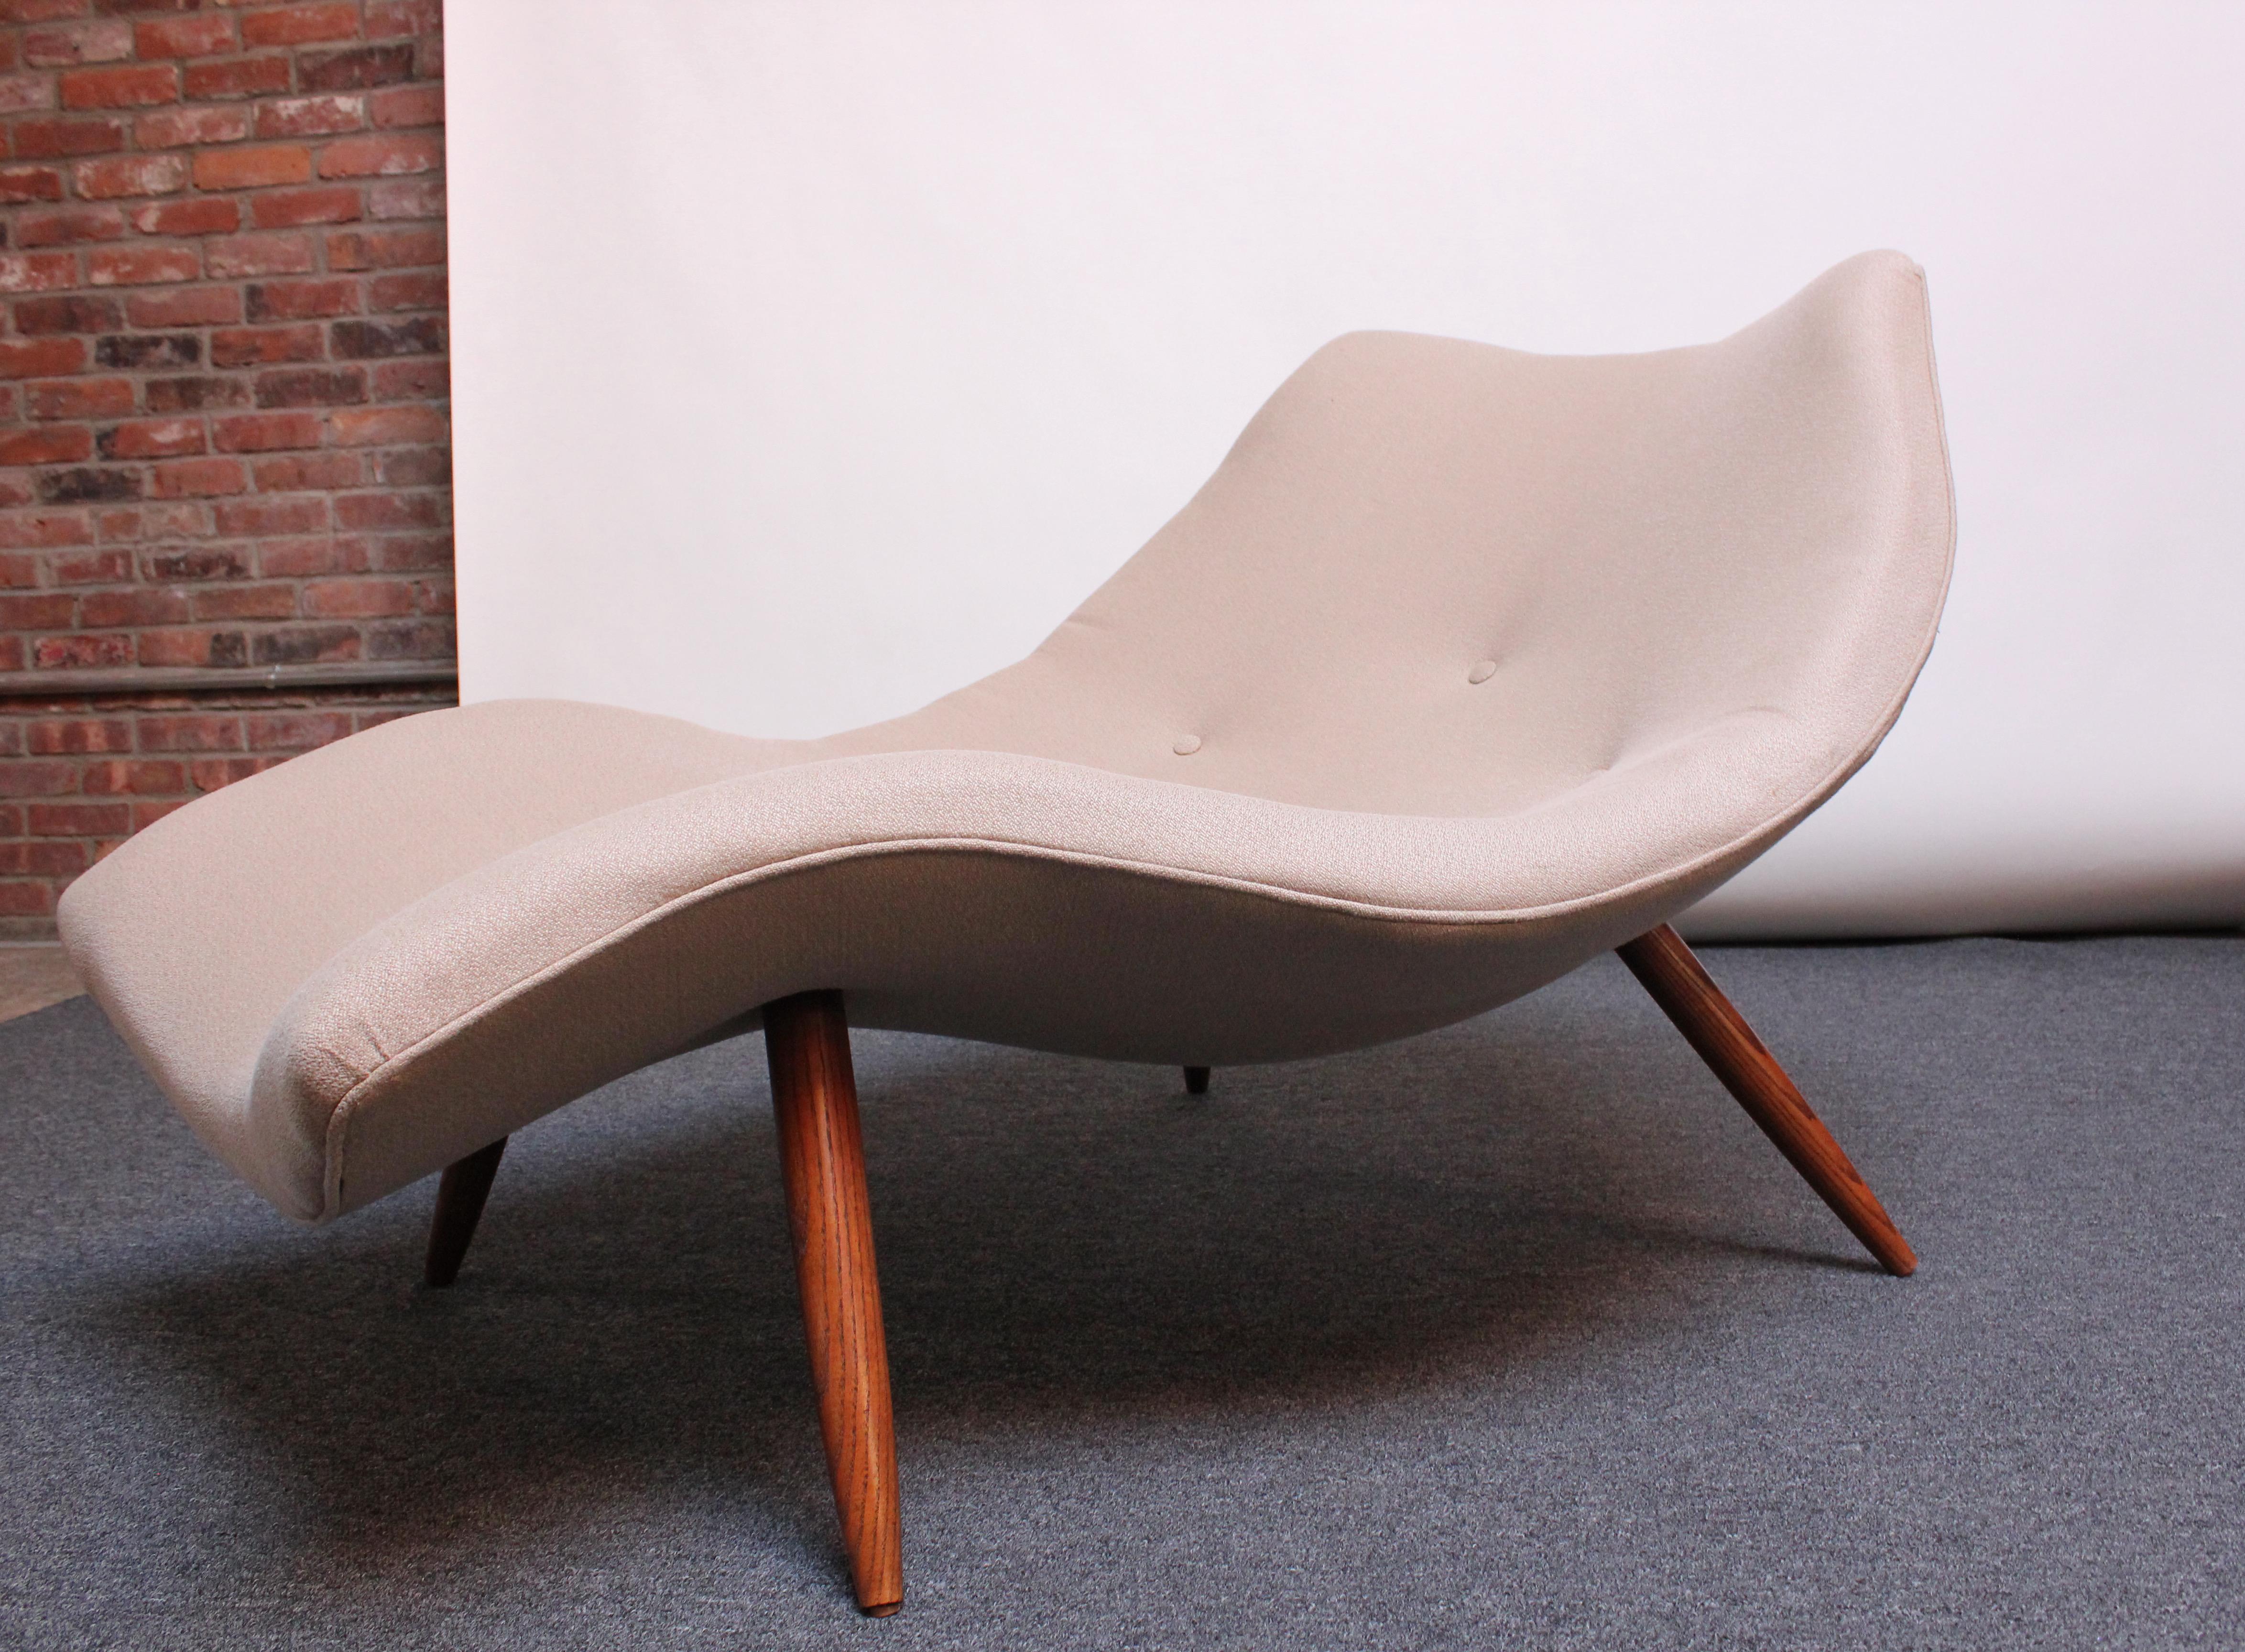 Mid-20th Century Vintage Sculptural Adrian Pearsall Chaise Lounge for Craft Associates